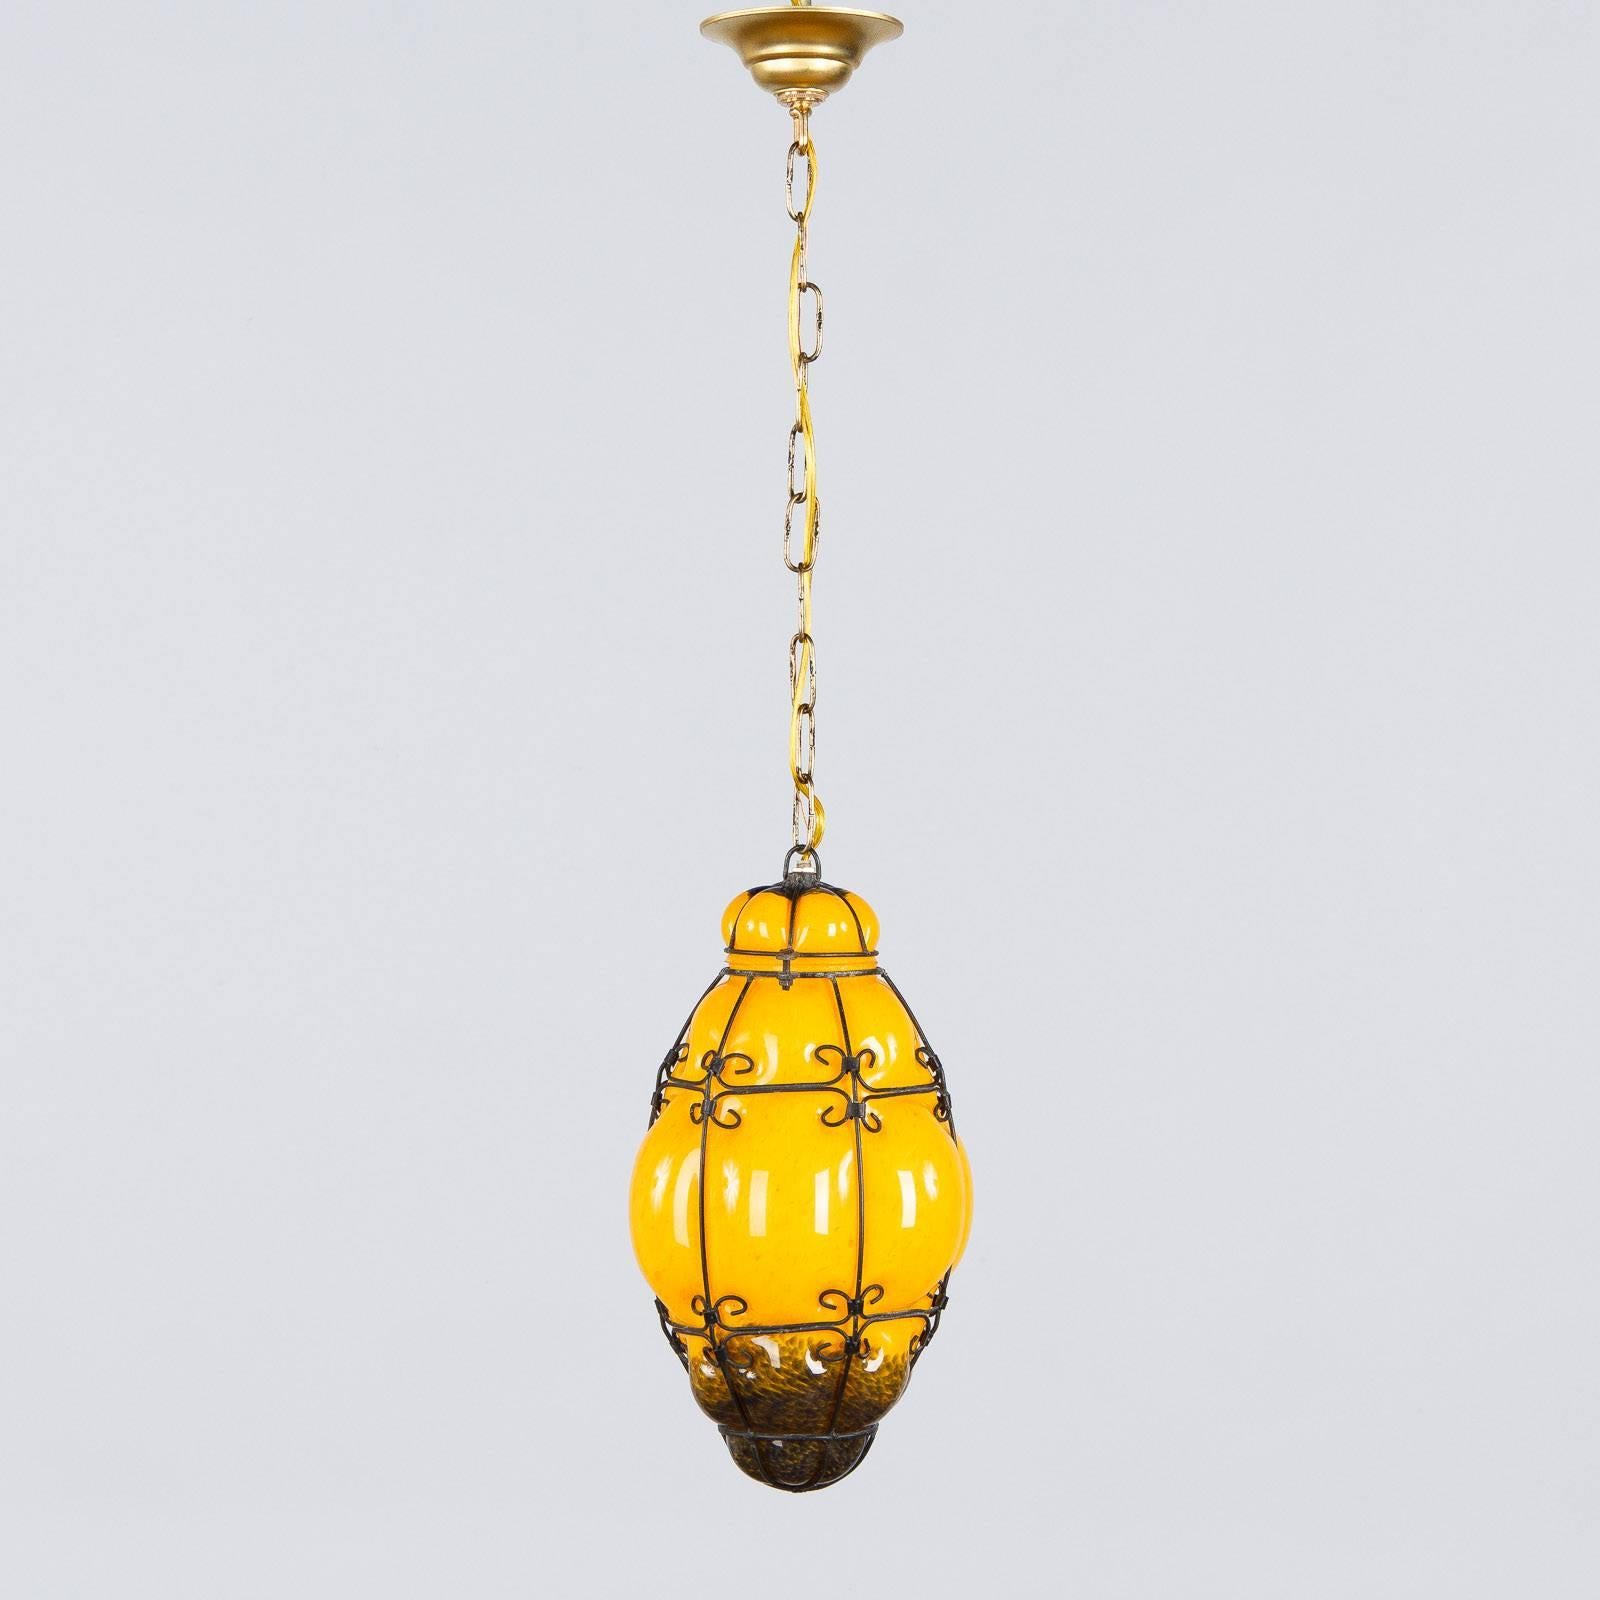 Midcentury Caged Murano Glass Pendant Lantern, Italy, 1950s For Sale 2